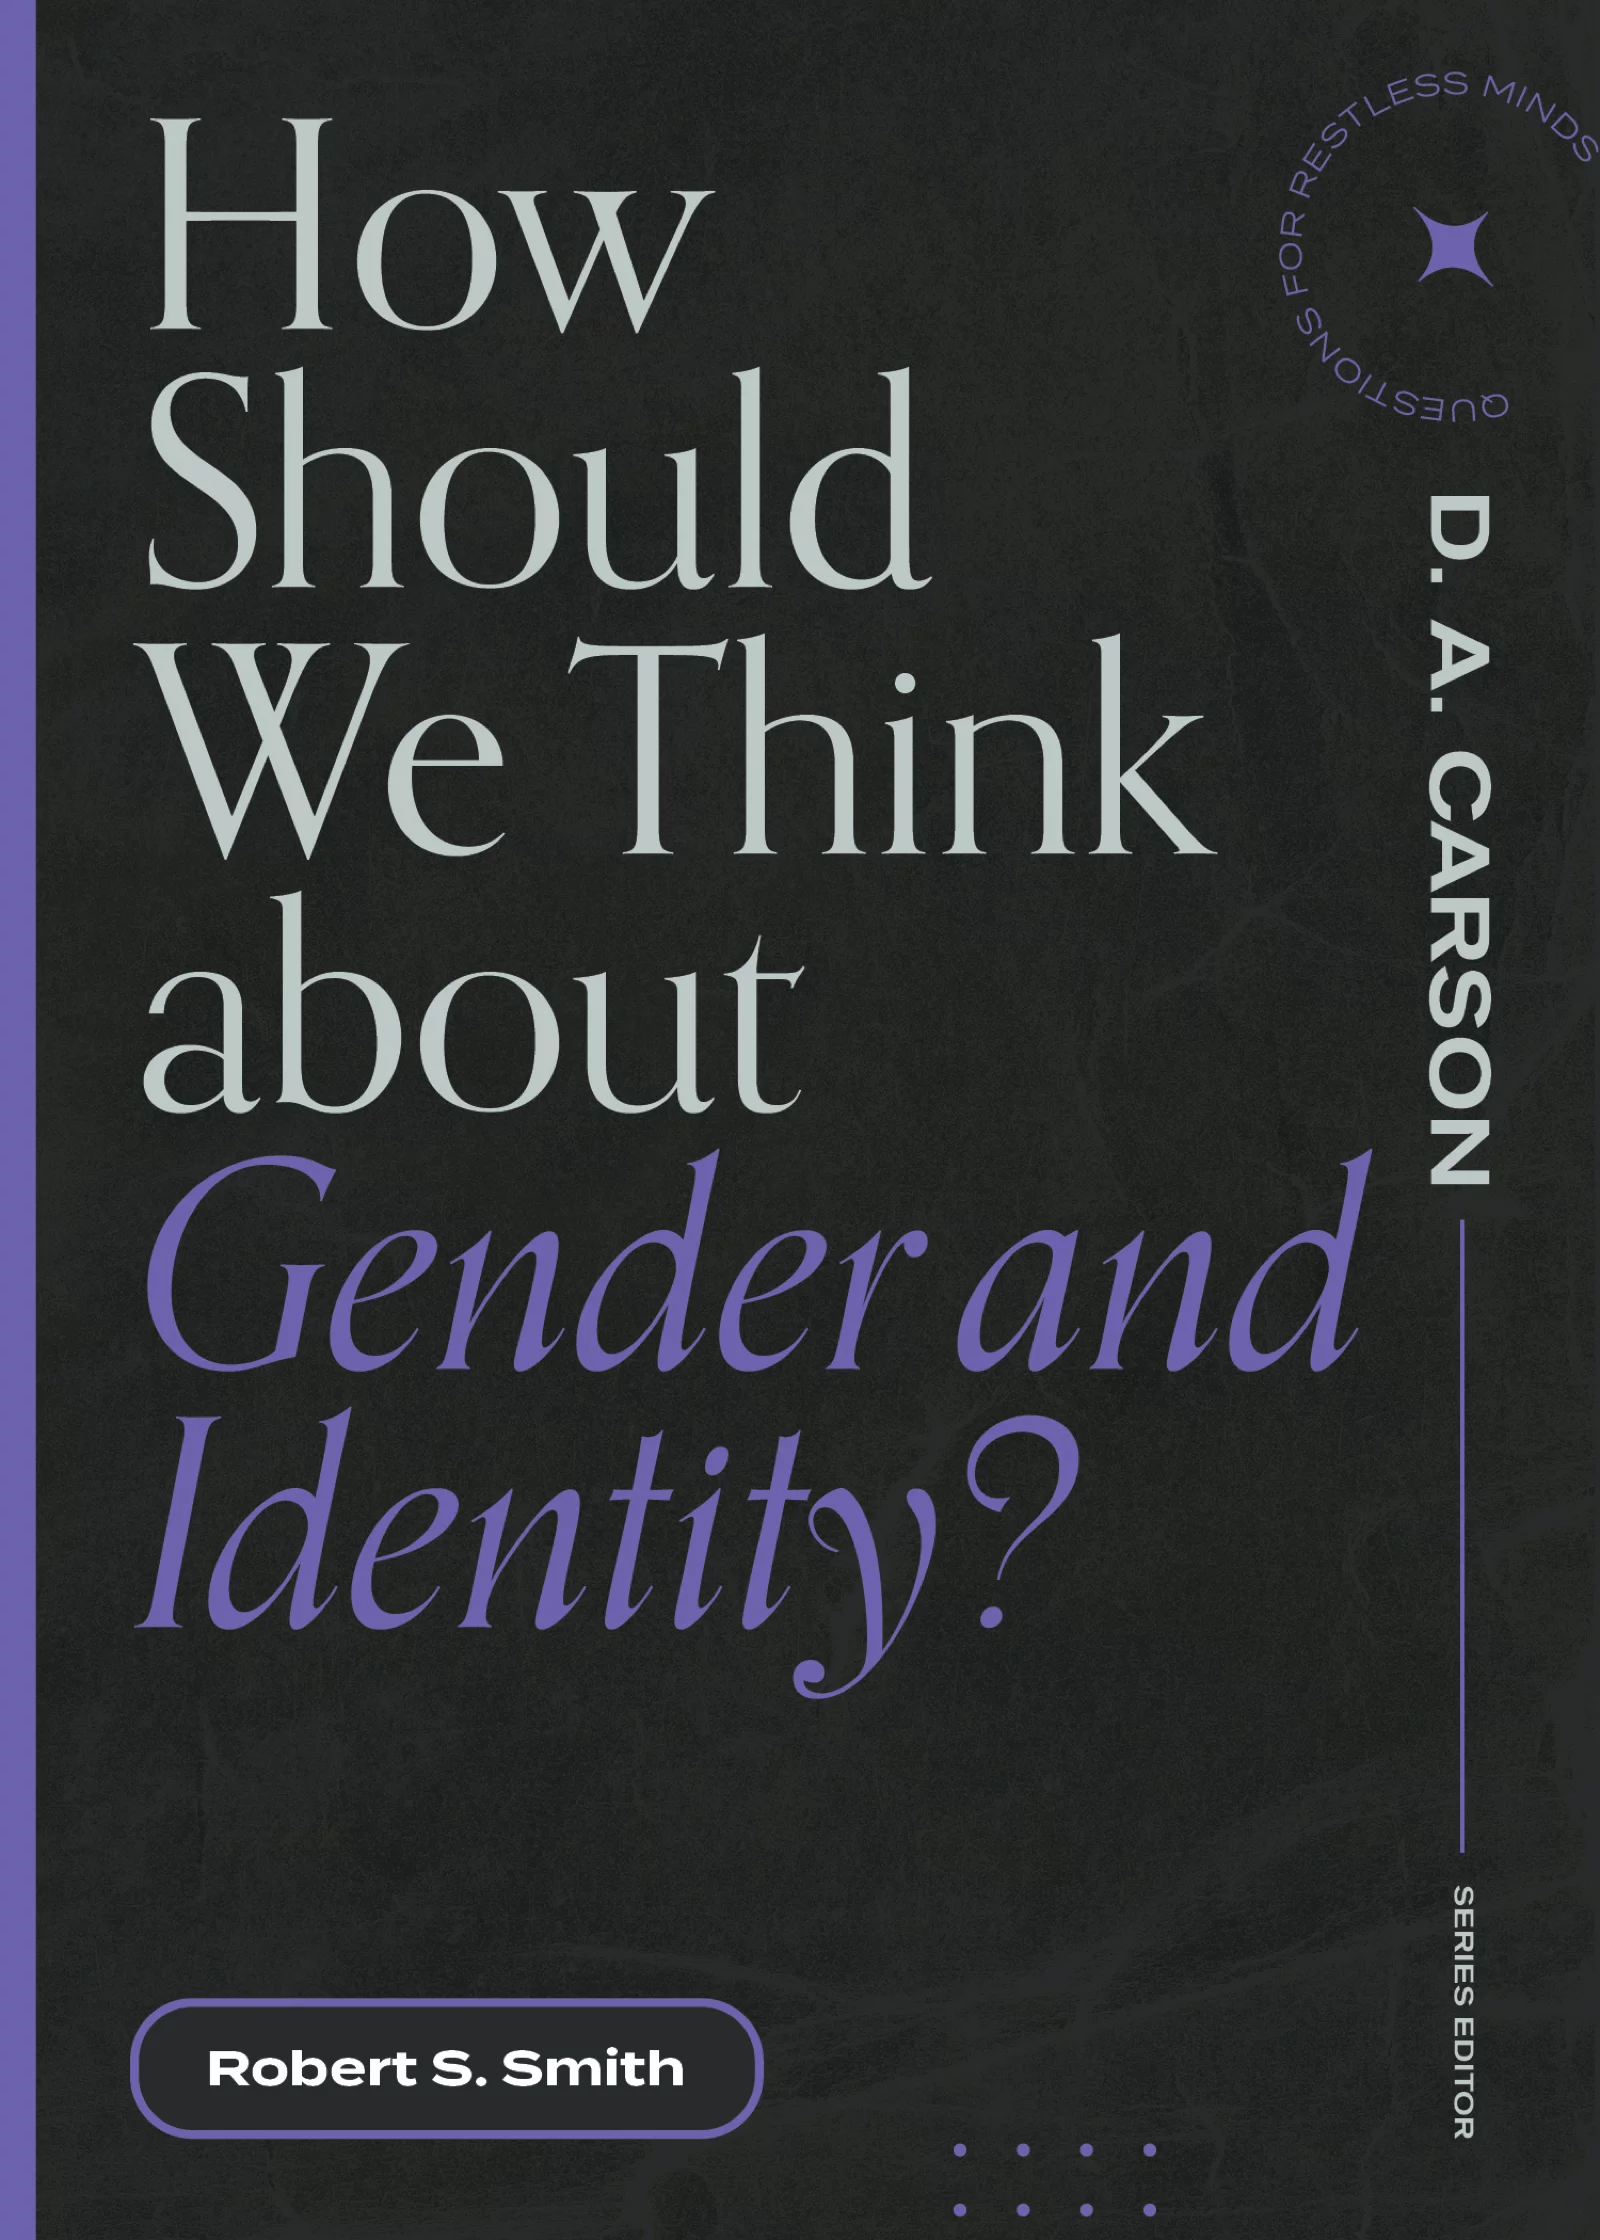  2022/08/How-should-we-think-about-gender-and-Identity.webp 